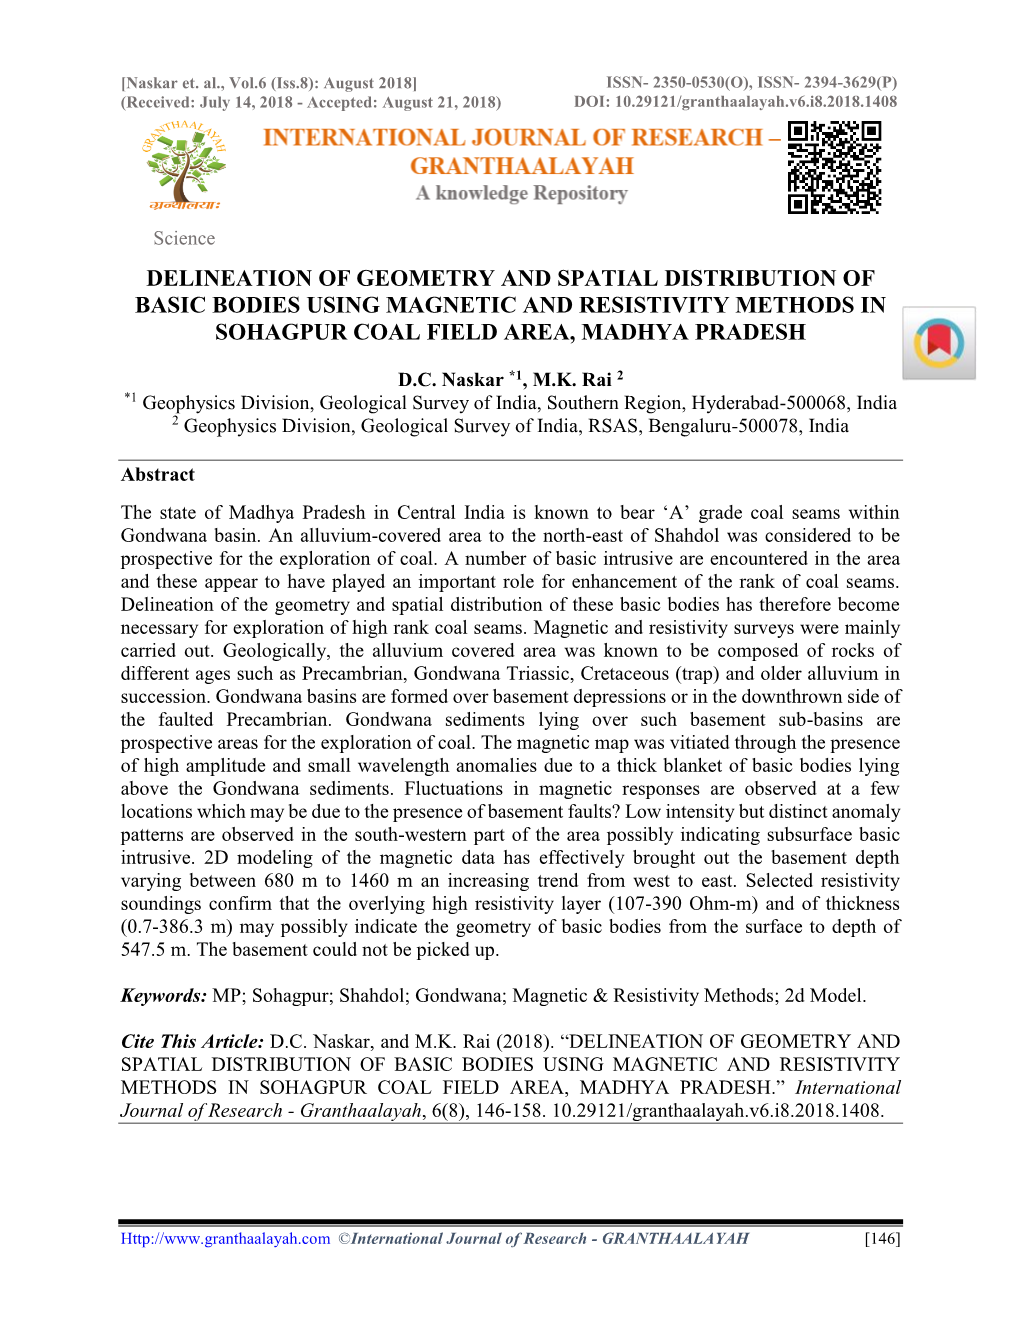 Delineation of Geometry and Spatial Distribution of Basic Bodies Using Magnetic and Resistivity Methods in Sohagpur Coal Field Area, Madhya Pradesh